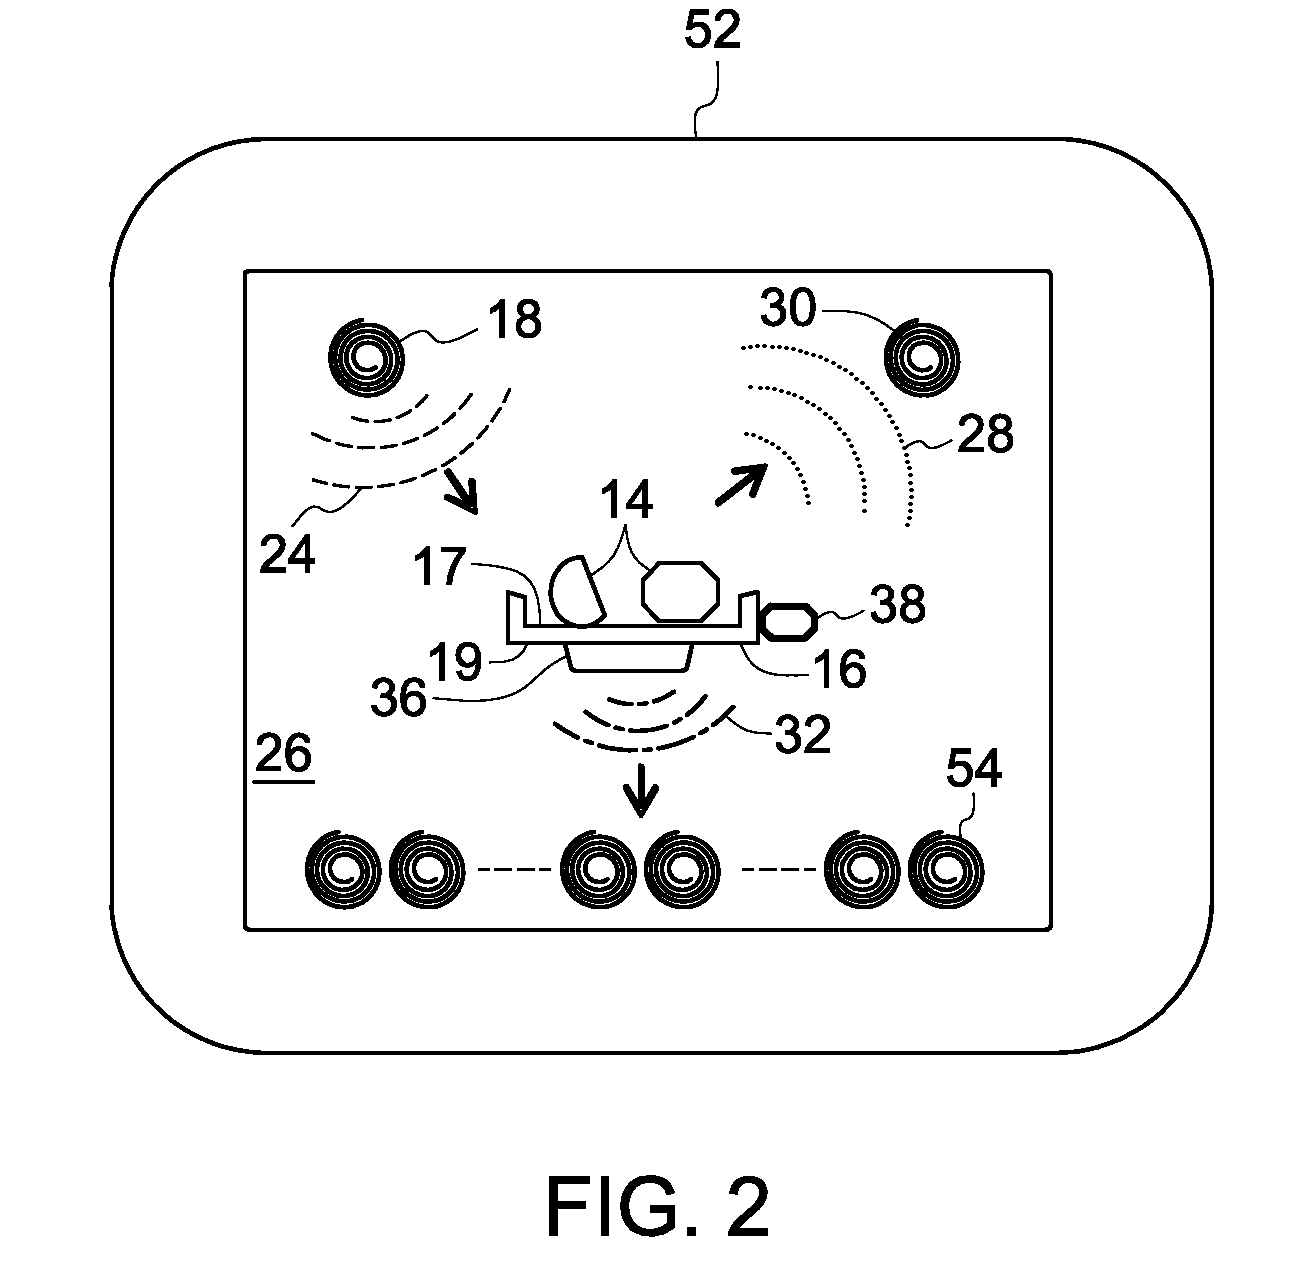 Systems and methods for non-destructively measuring calorie contents of food items